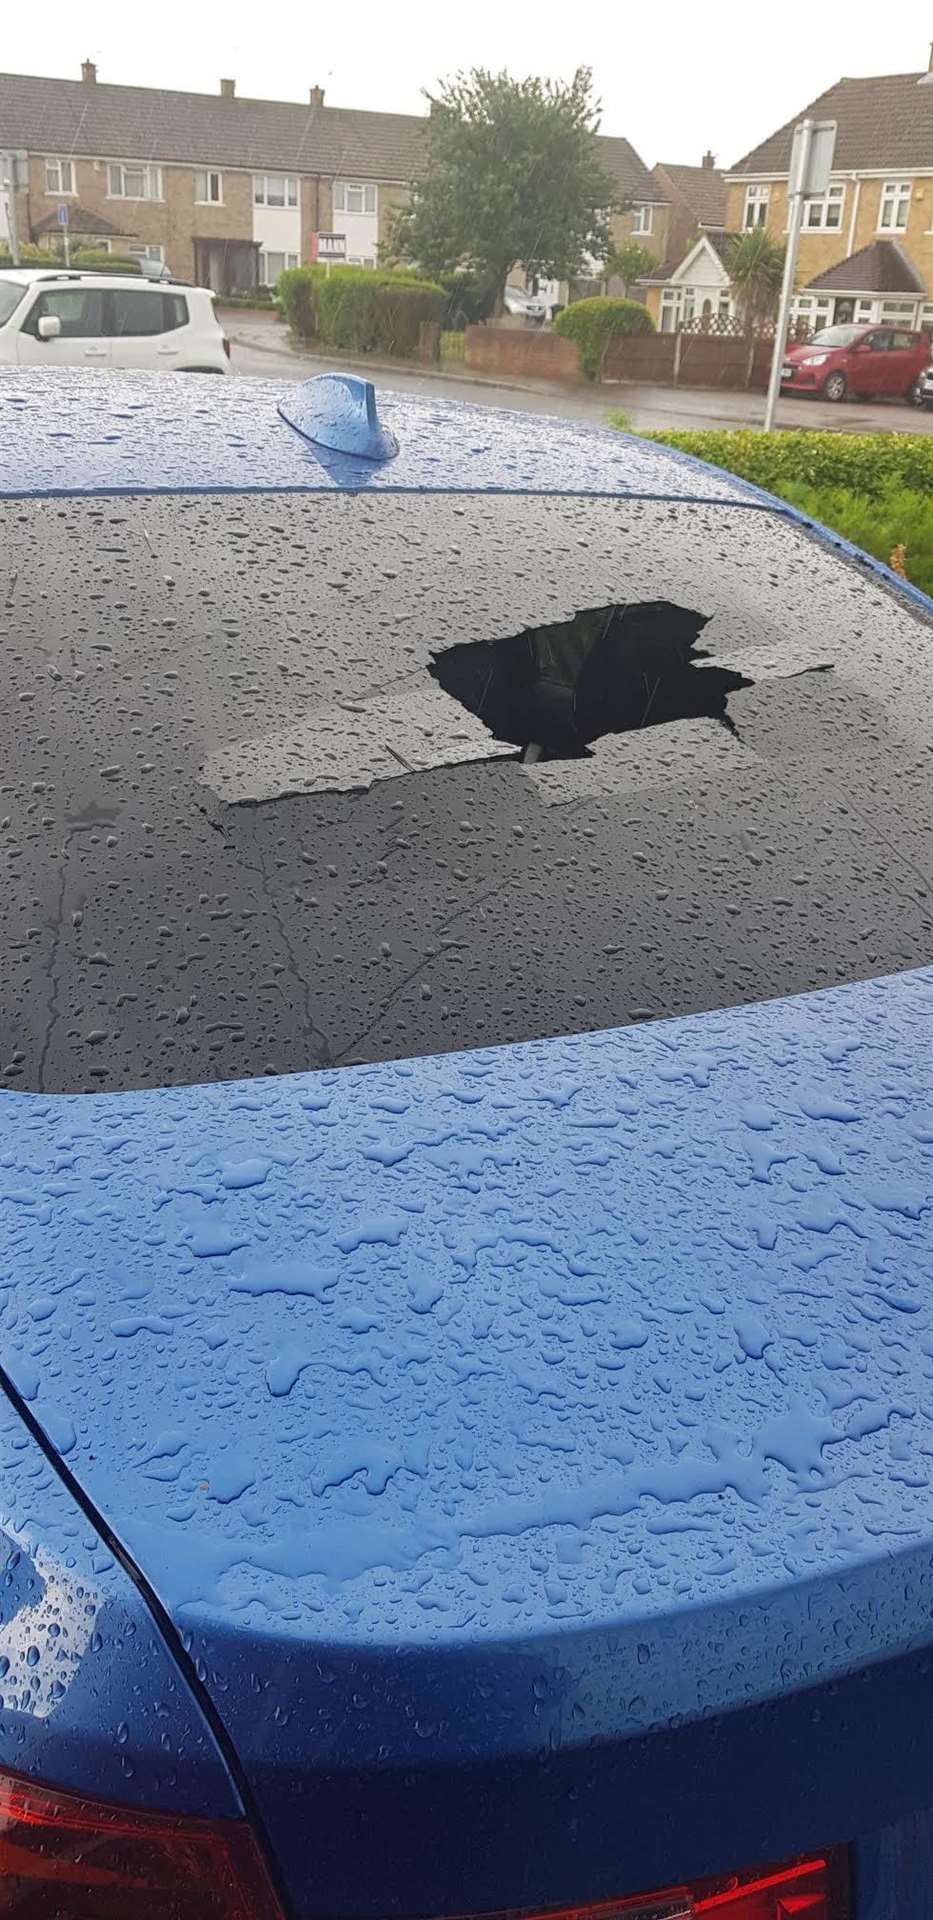 Michelle James was shocked when a hole appeared in her windscreen after a storm (14447086)